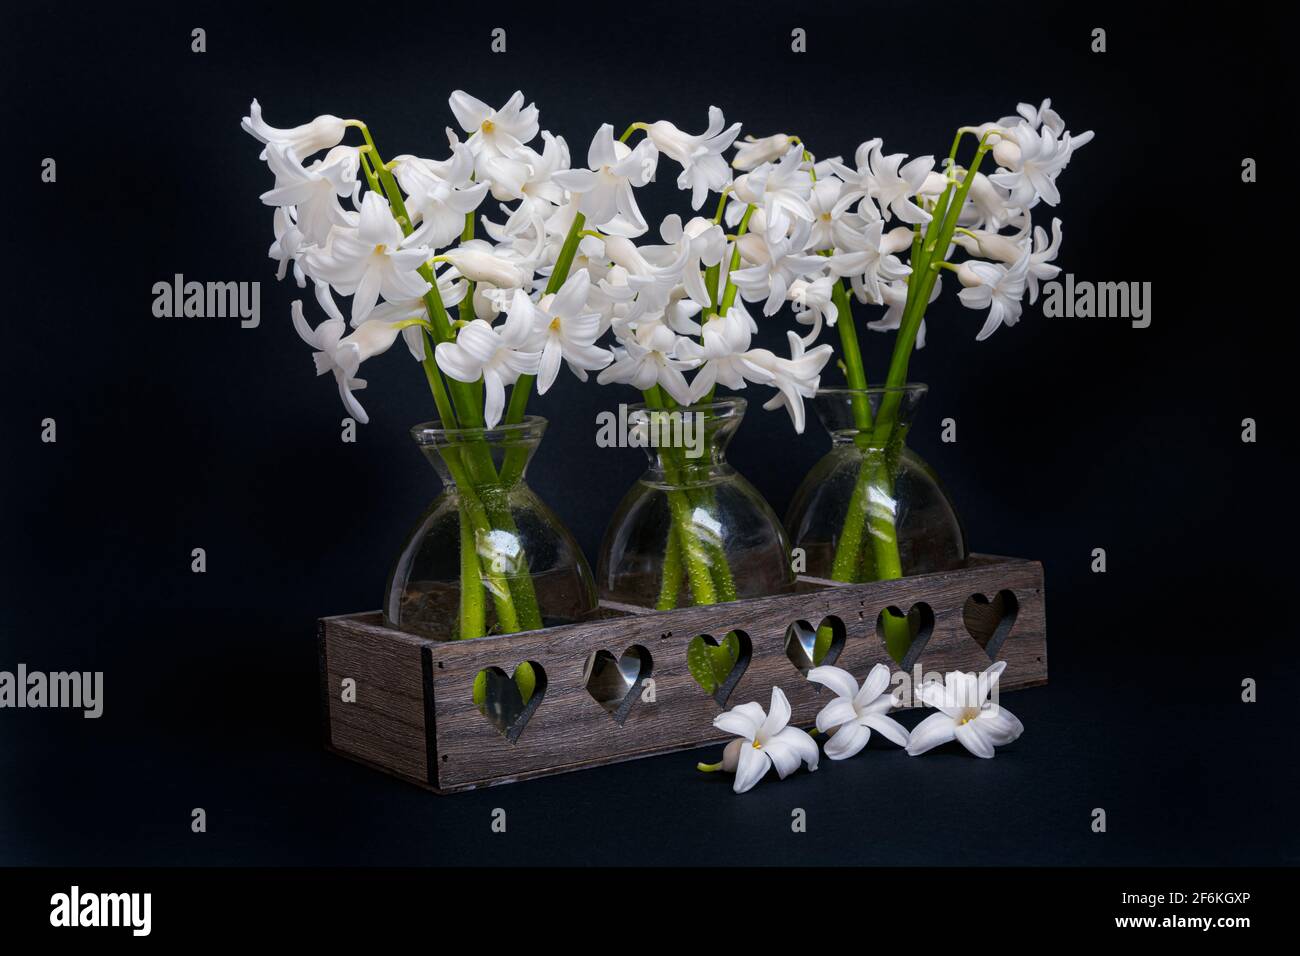 Bouquets of white Hyacinths  in small glass vases on a black background Stock Photo